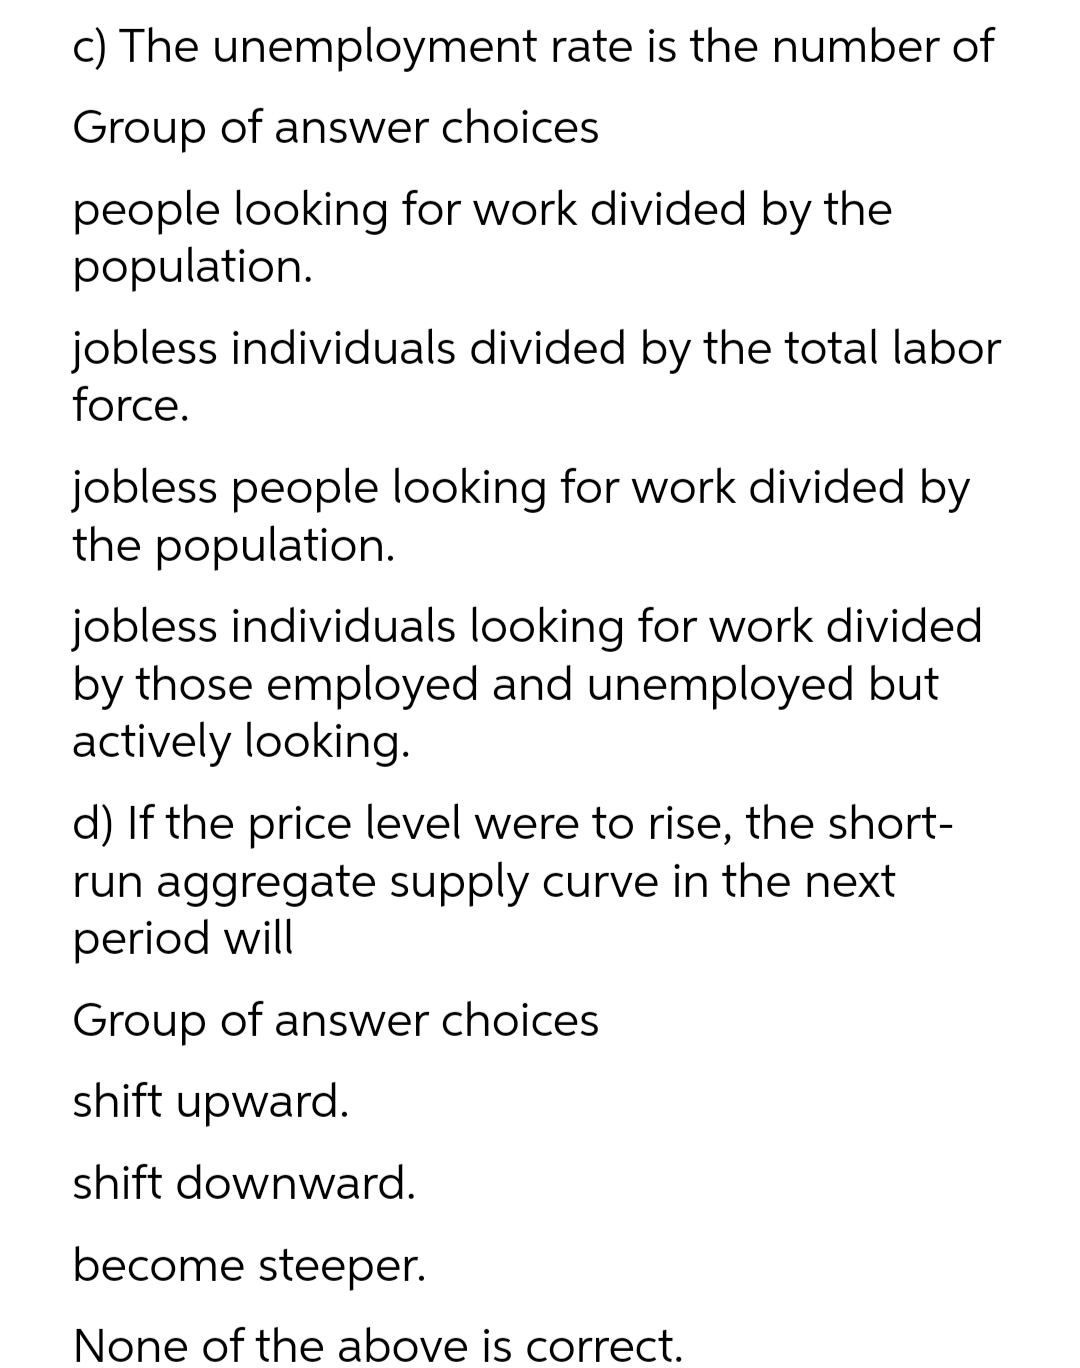 c) The unemployment rate is the number of
Group of answer choices
people looking for work divided by the
population.
jobless individuals divided by the total labor
force.
jobless people looking for work divided by
the population.
jobless individuals looking for work divided
by those employed and unemployed but
actively looking.
d) If the price level were to rise, the short-
run aggregate supply curve in the next
period will
Group of answer choices
shift upward.
shift downward.
become steeper.
None of the above is correct.
